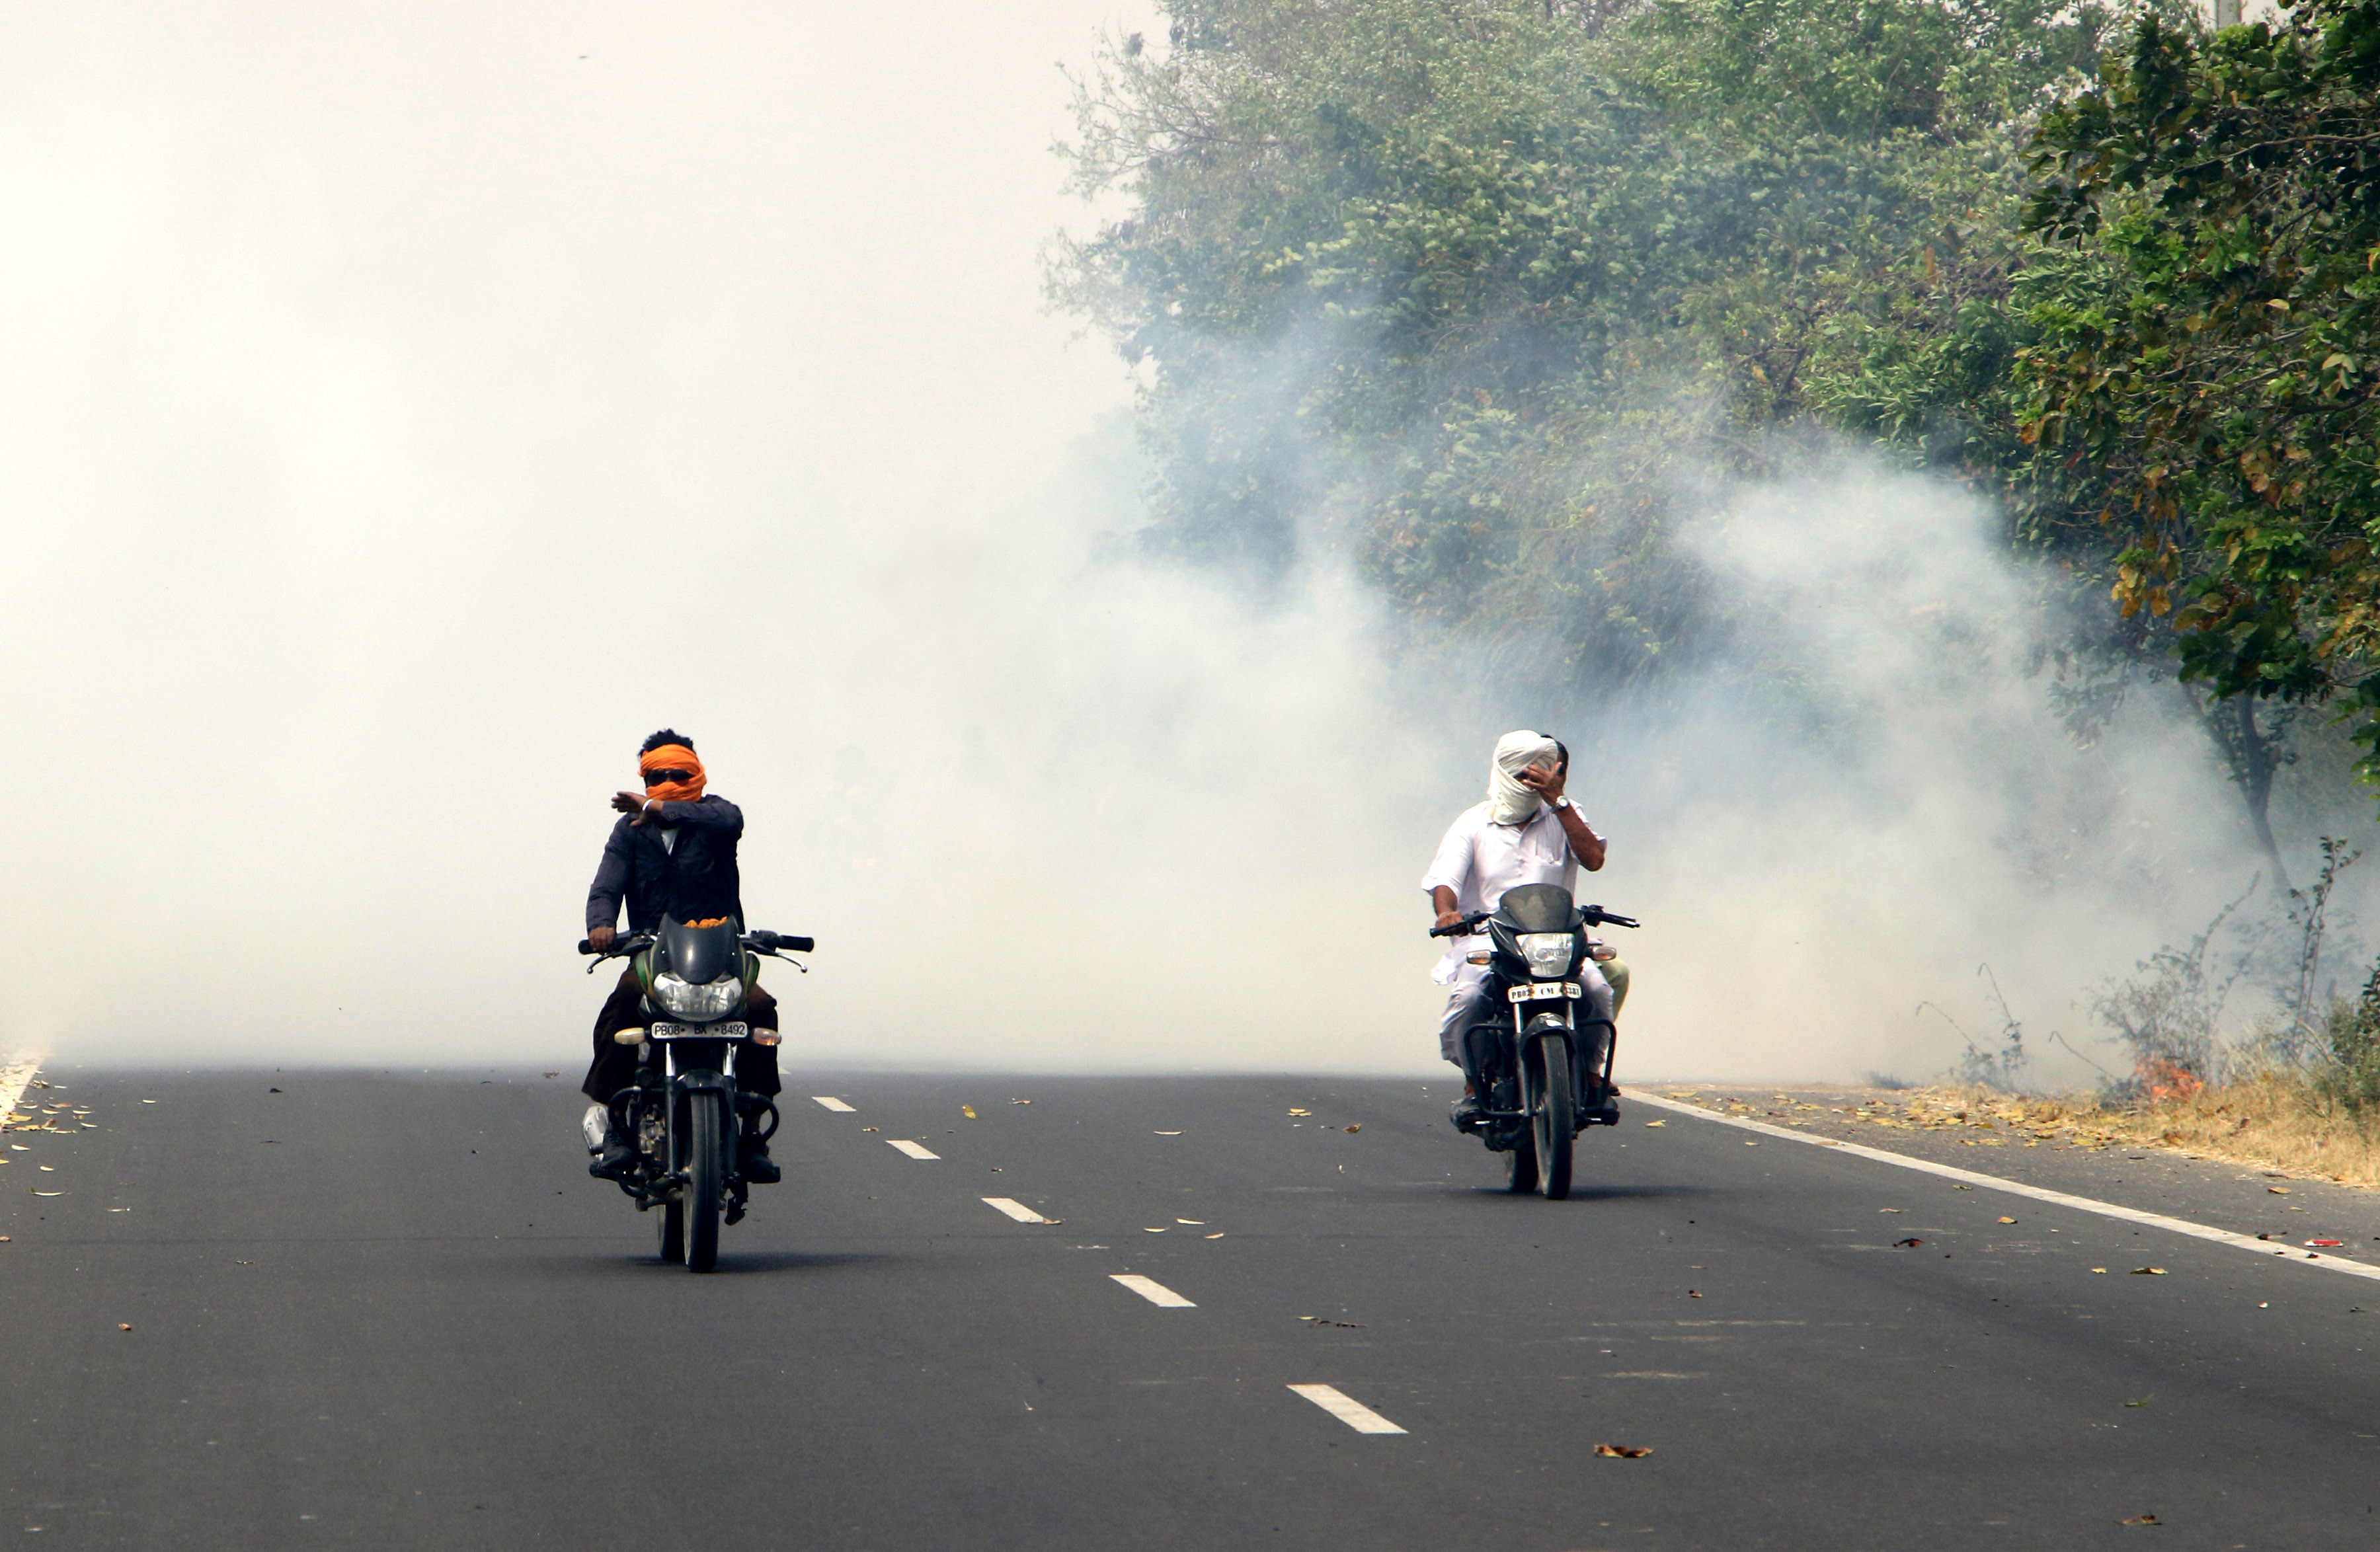 No let-up in stubble burning: 793 fire spots reported so far in Amritsar district